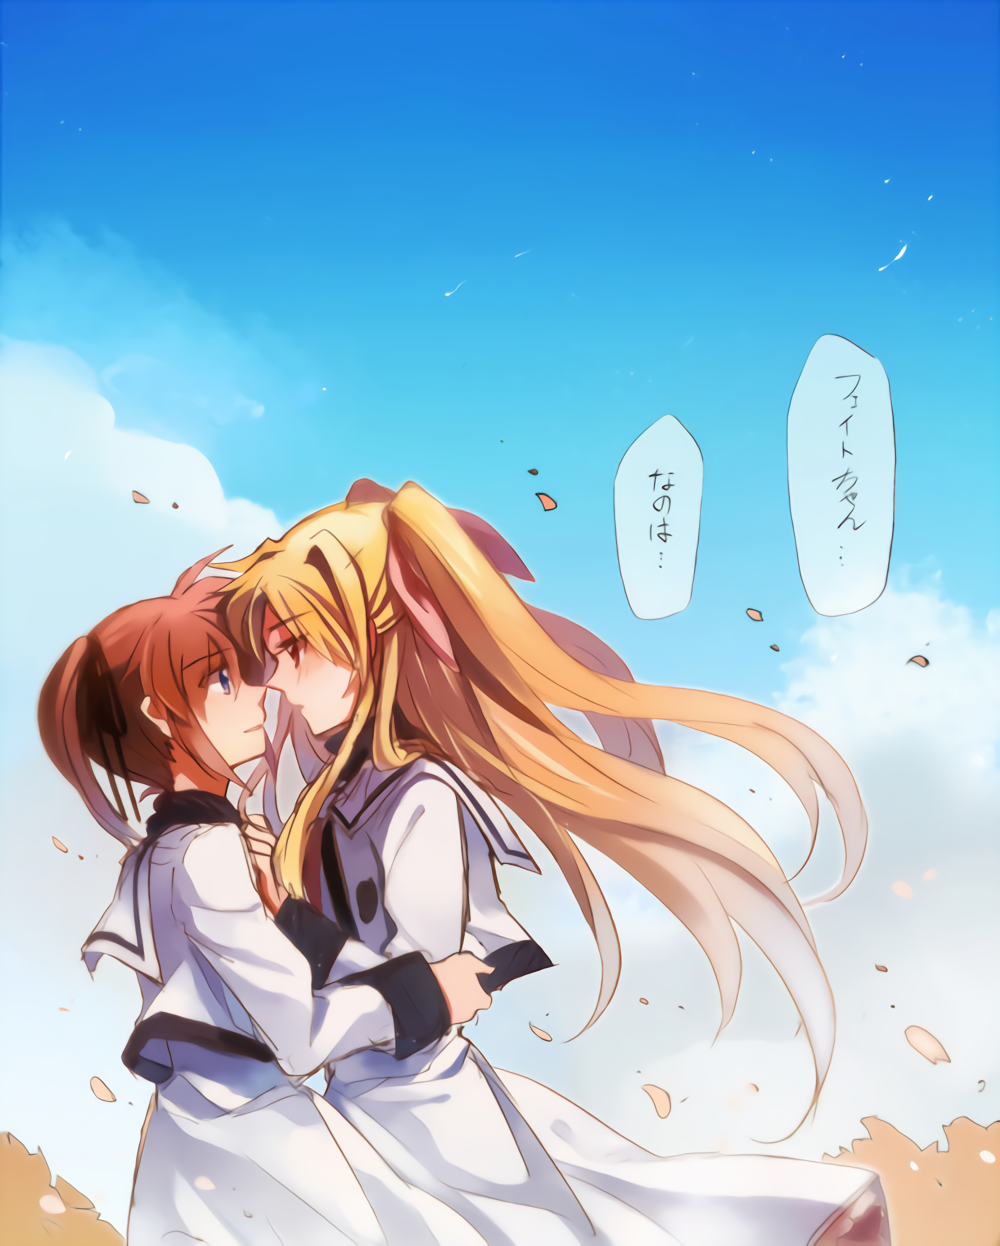 2girls blonde_hair blush brown_hair clouds couple eye_contact fate_testarossa hug incipient_kiss leaves looking_at_another lyrical_nanoha mahou_shoujo_lyrical_nanoha mahou_shoujo_lyrical_nanoha_a's multiple_girls open_mouth pigtails purple_eyes red_eyes school_uniform sky takamachi_nanoha translation_request trees twintails uniform yuri